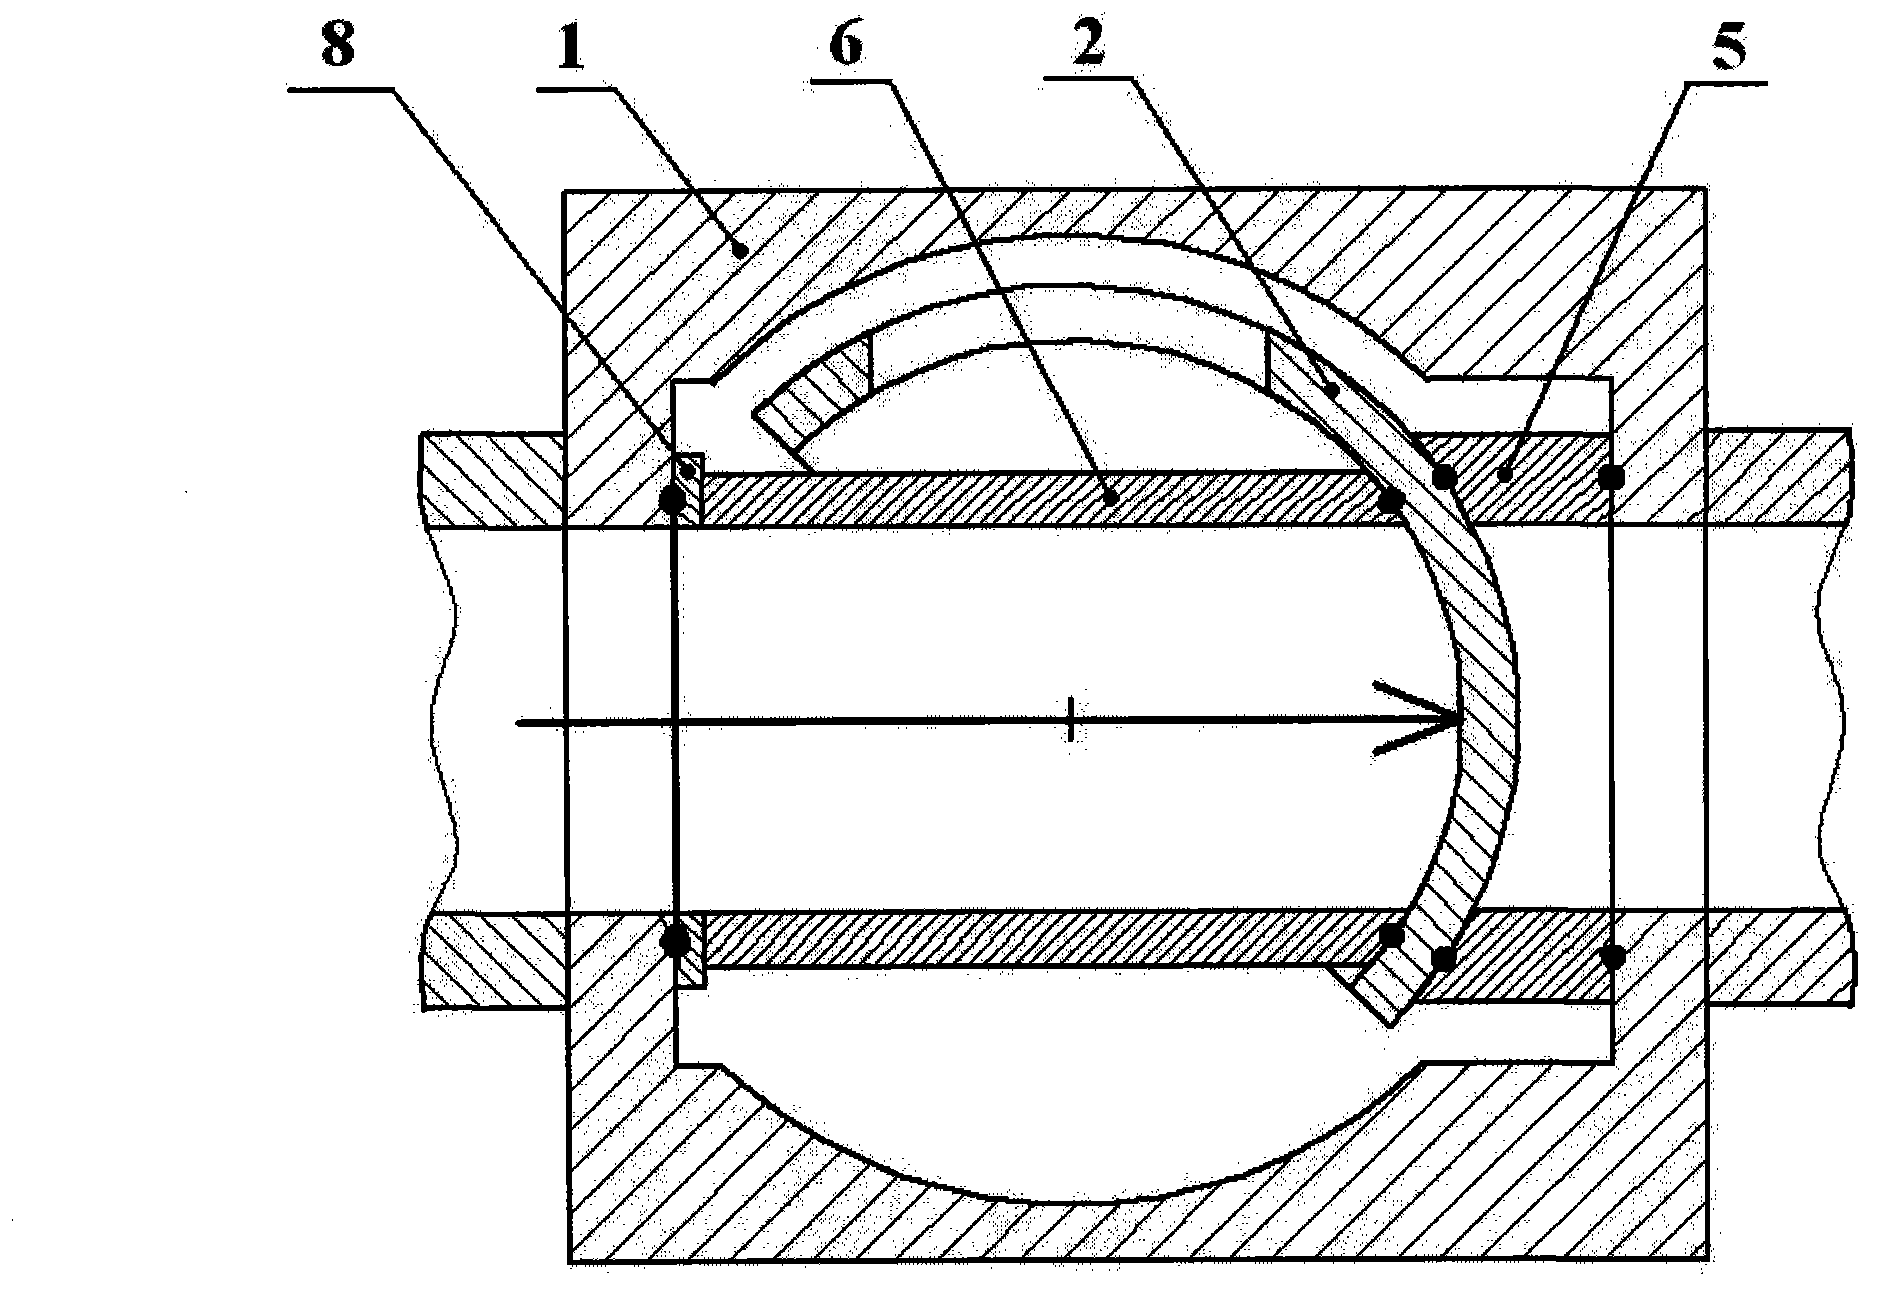 Forced seal valve with modular design and angular travel operation